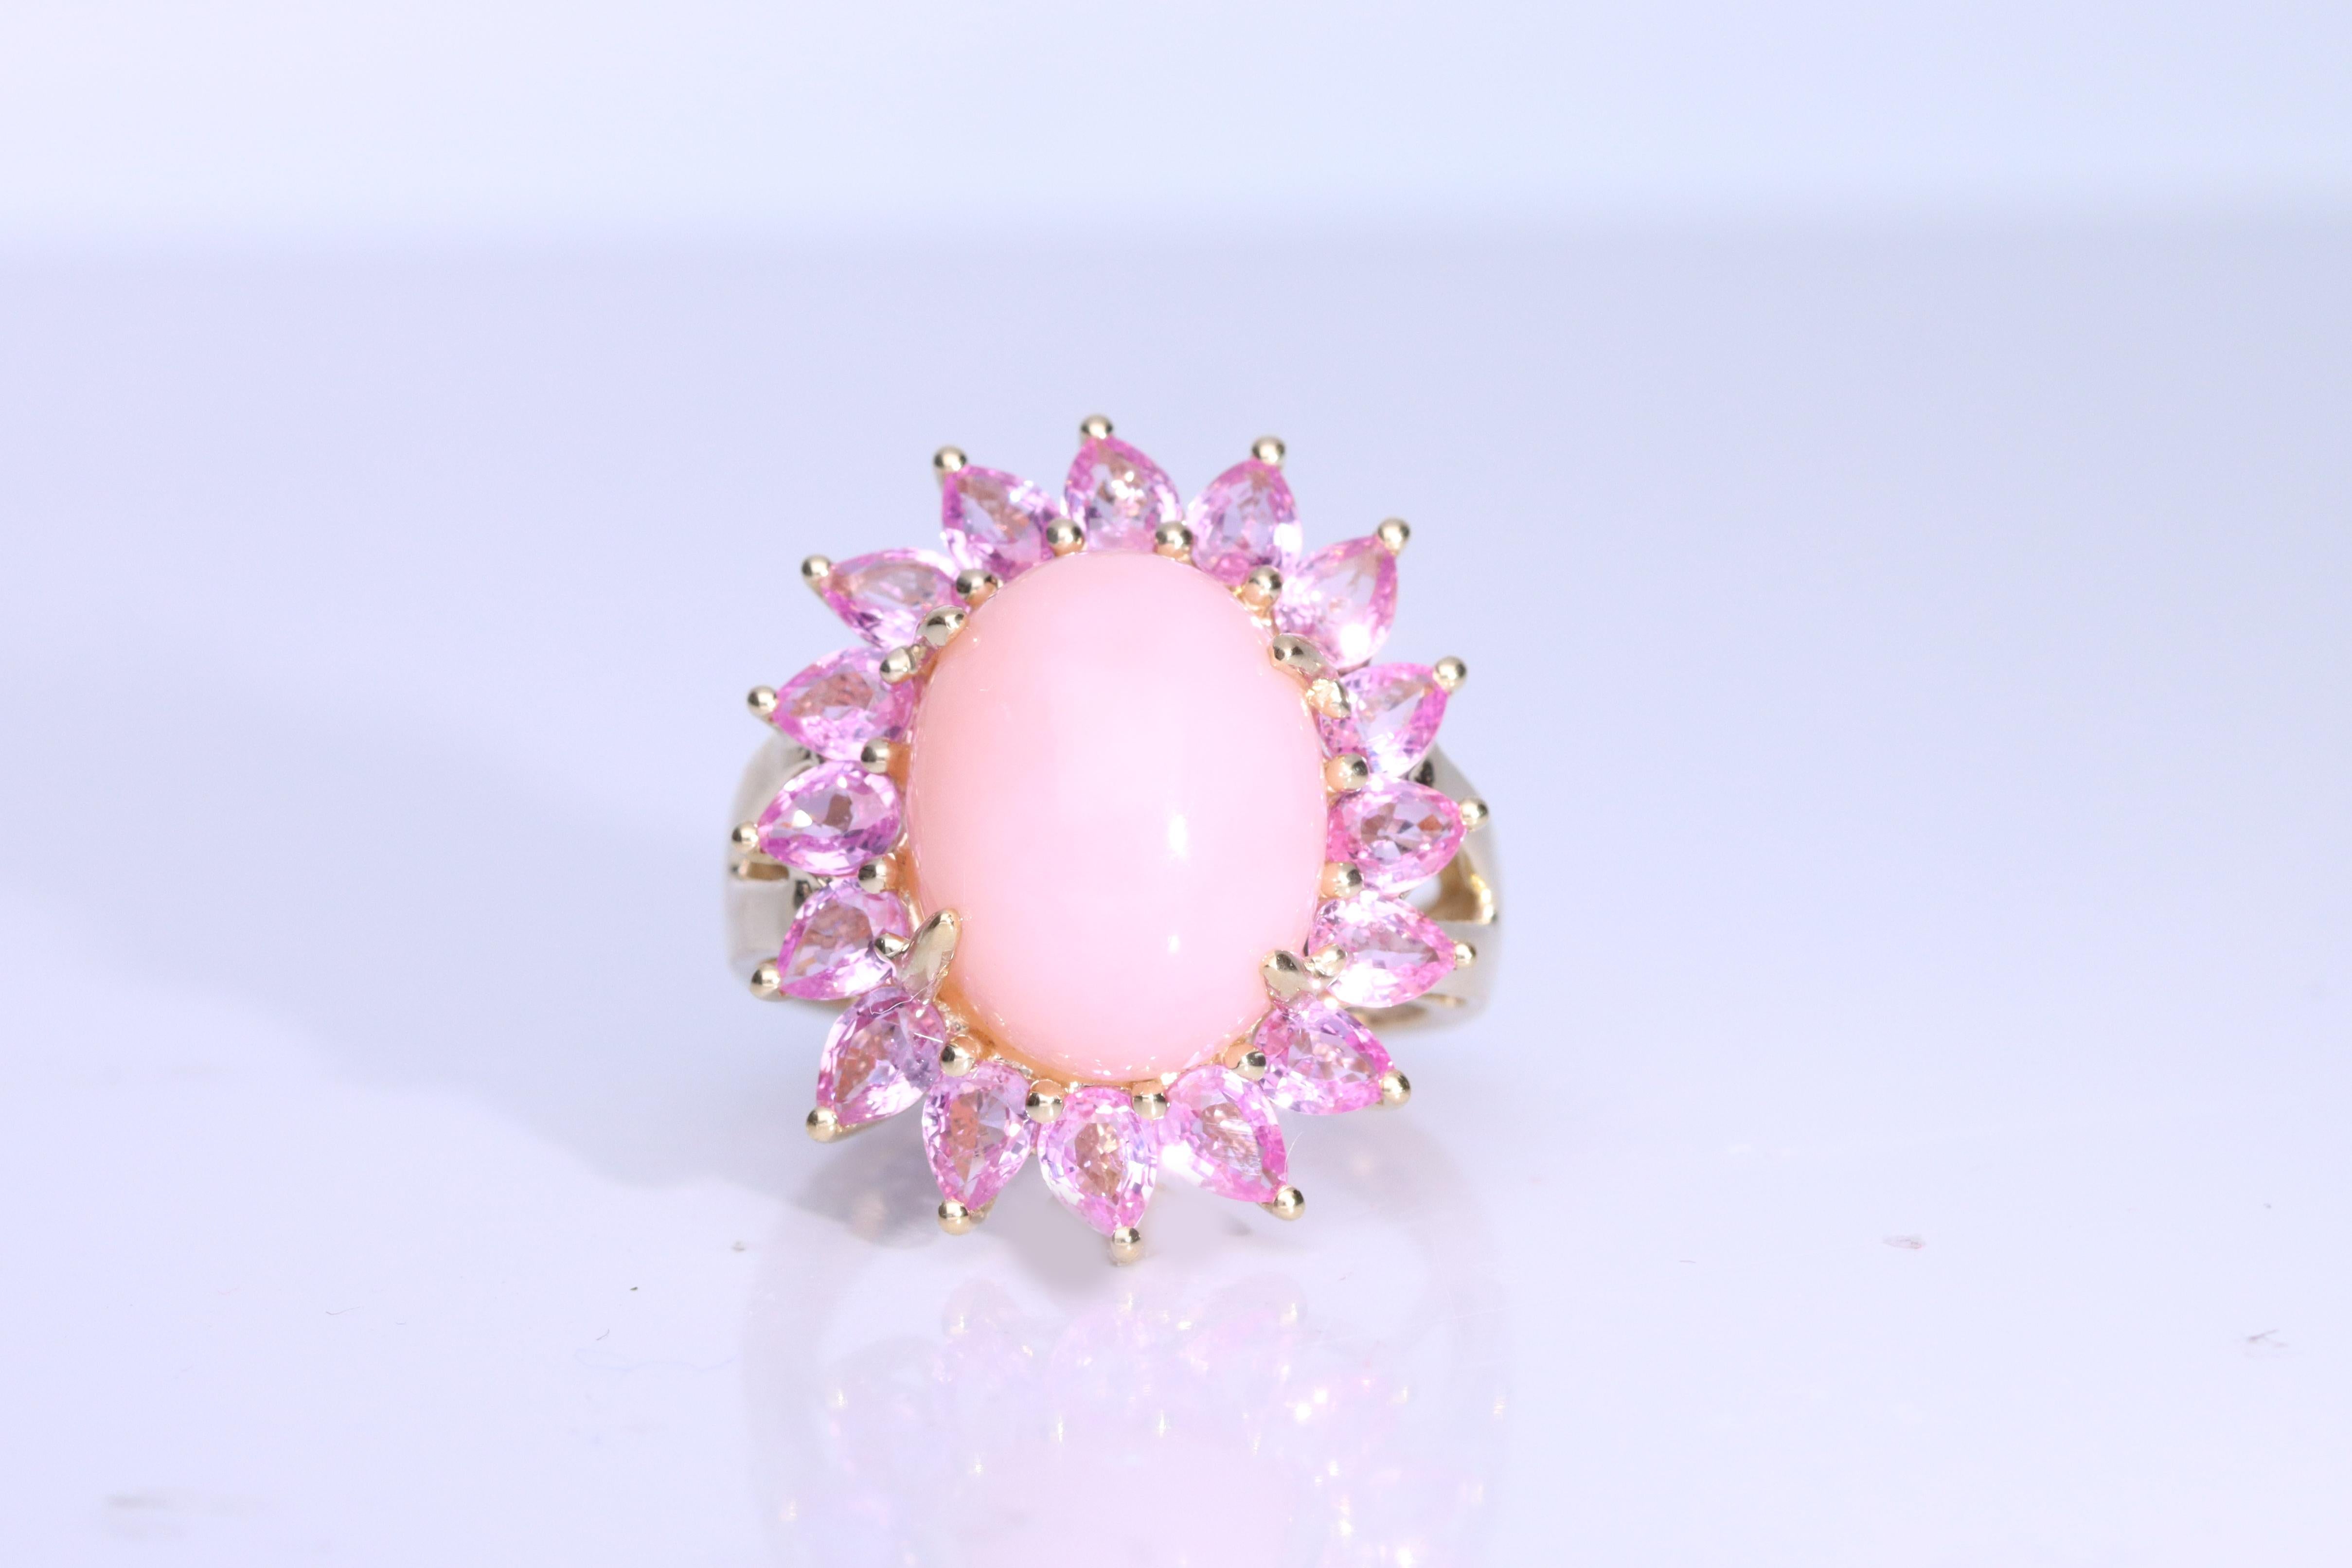 Decorate yourself in elegance with this Ring is crafted from 14K Yellow Gold by Gin & Grace. This Ring is made up of 11x14 mm Oval-Cab (1 pcs) 5.49 carat Pink Opal and Round-cut Pink-Sapphire (16 pcs) 2.85 carat. This Ring is weight 4.51 grams. This